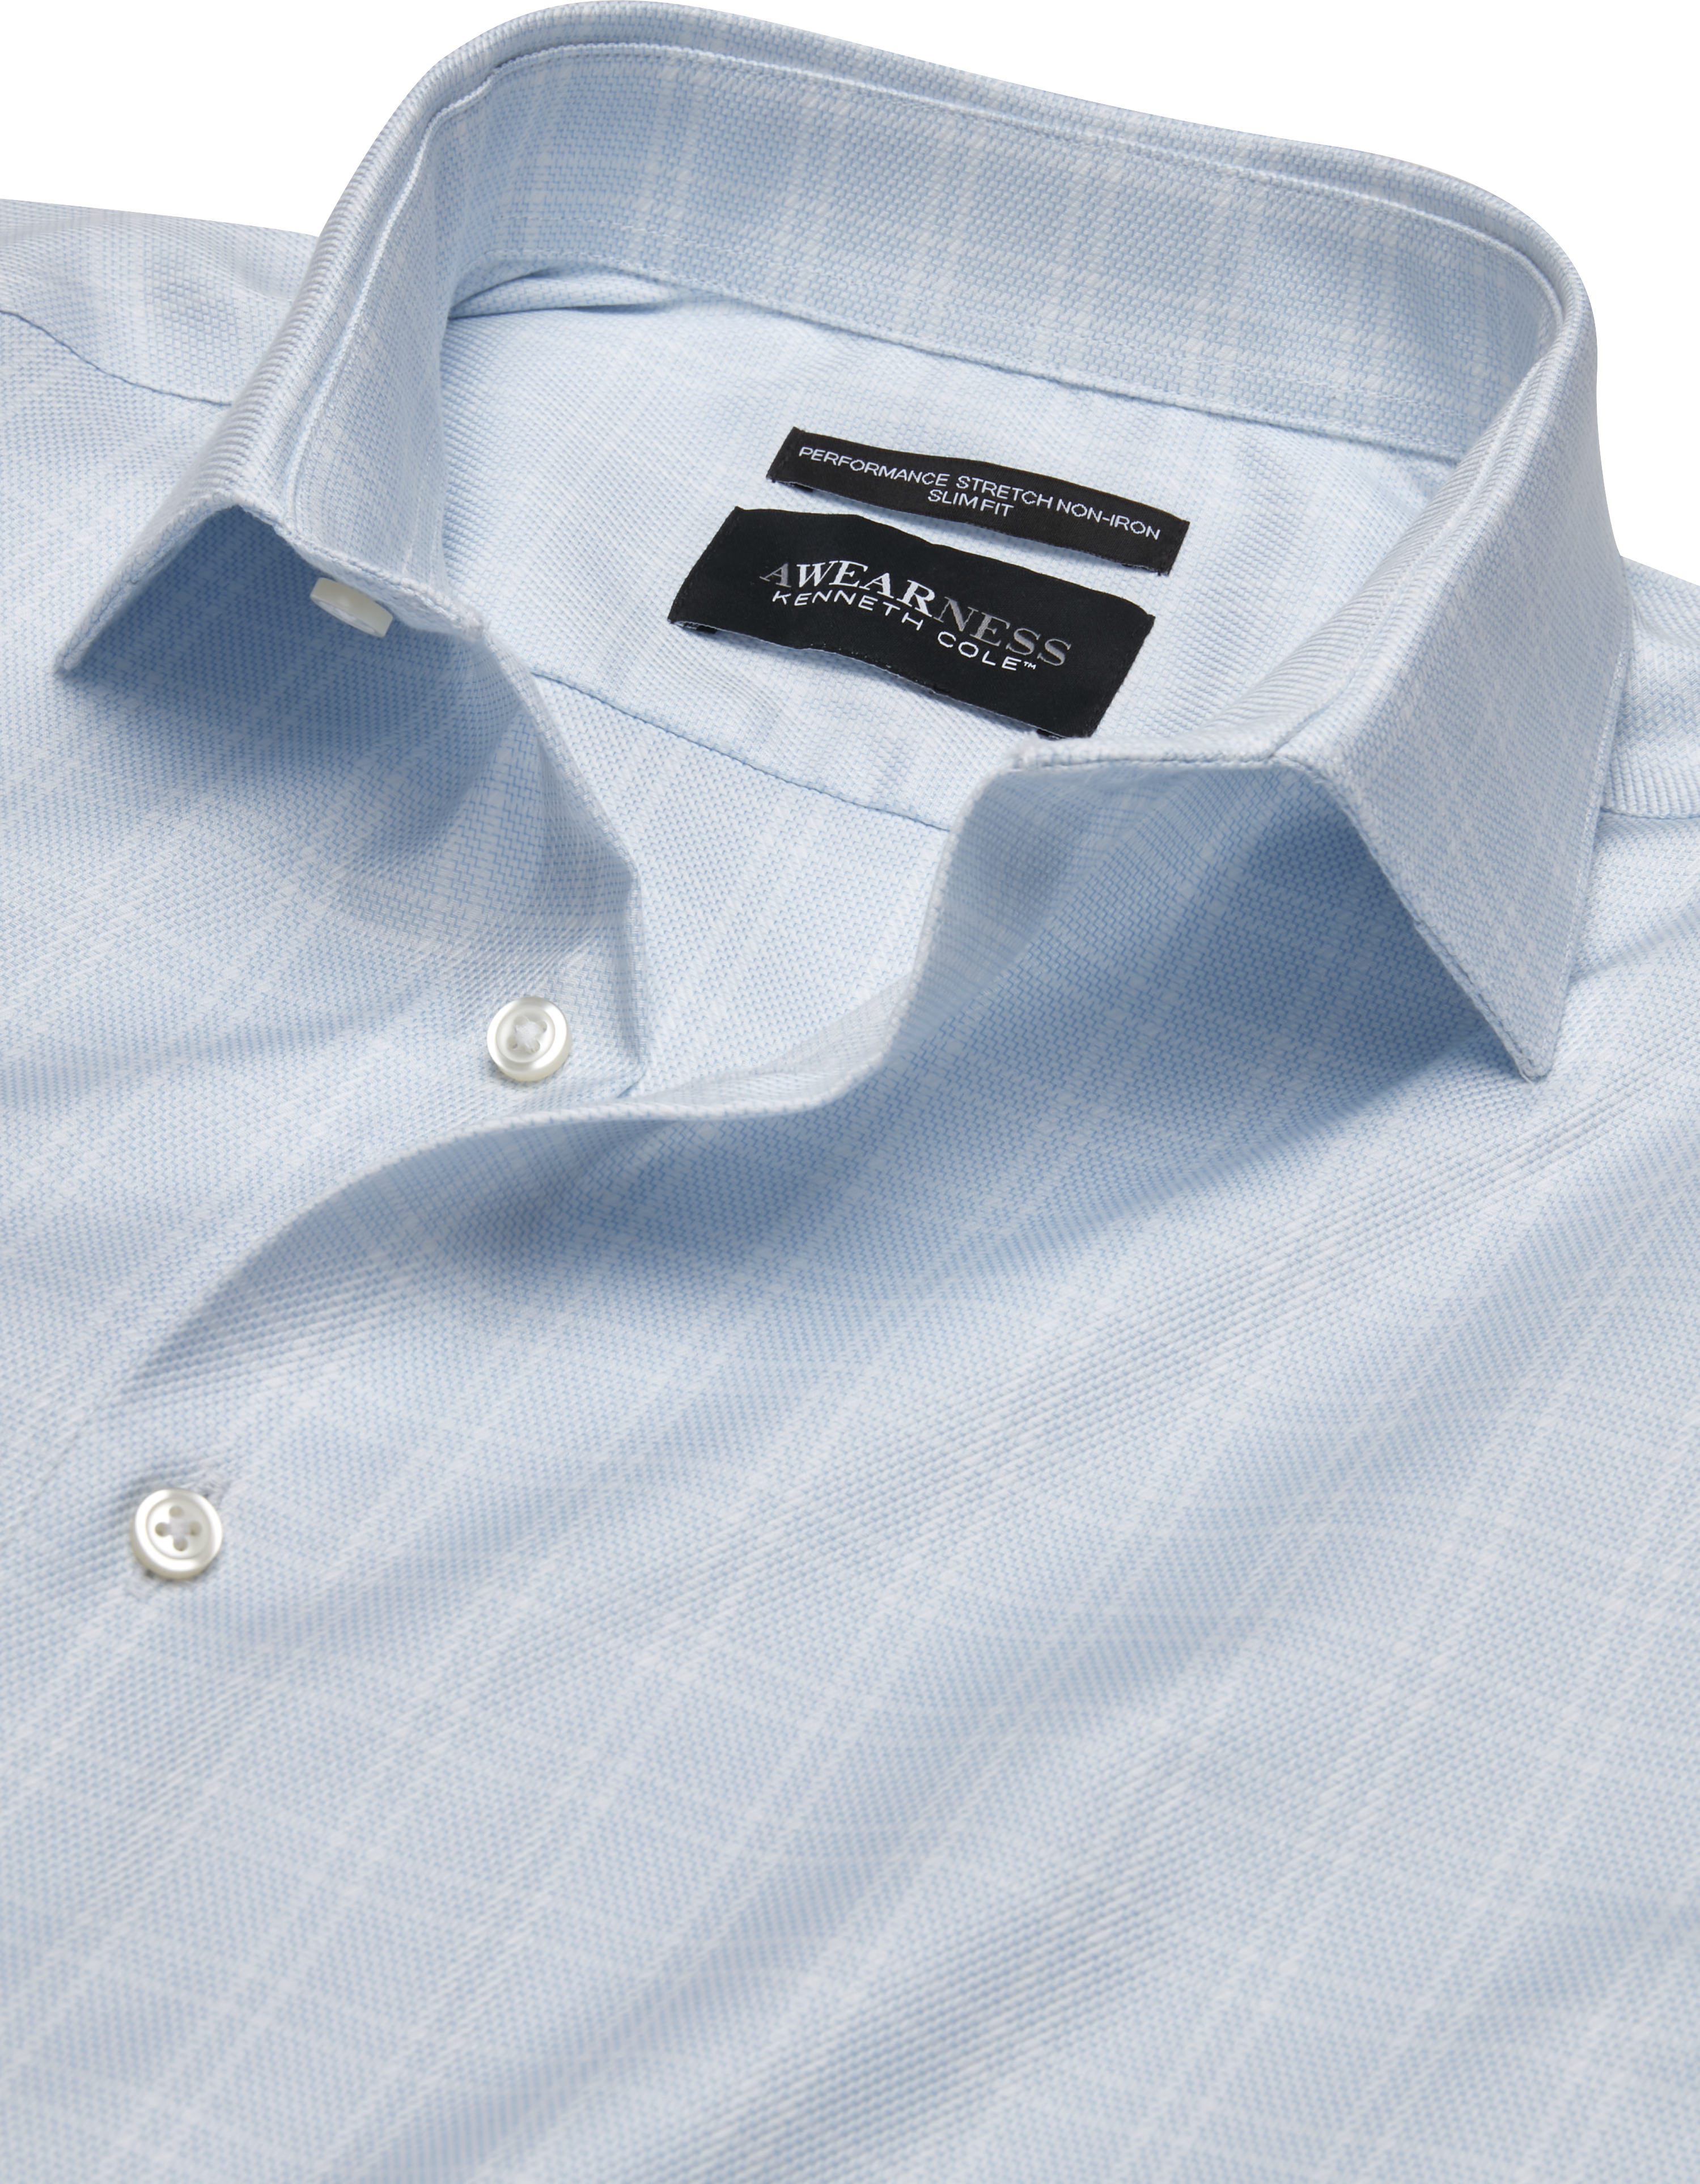 Slim Fit Ultra Performance Stretch Double Check Dress Shirt